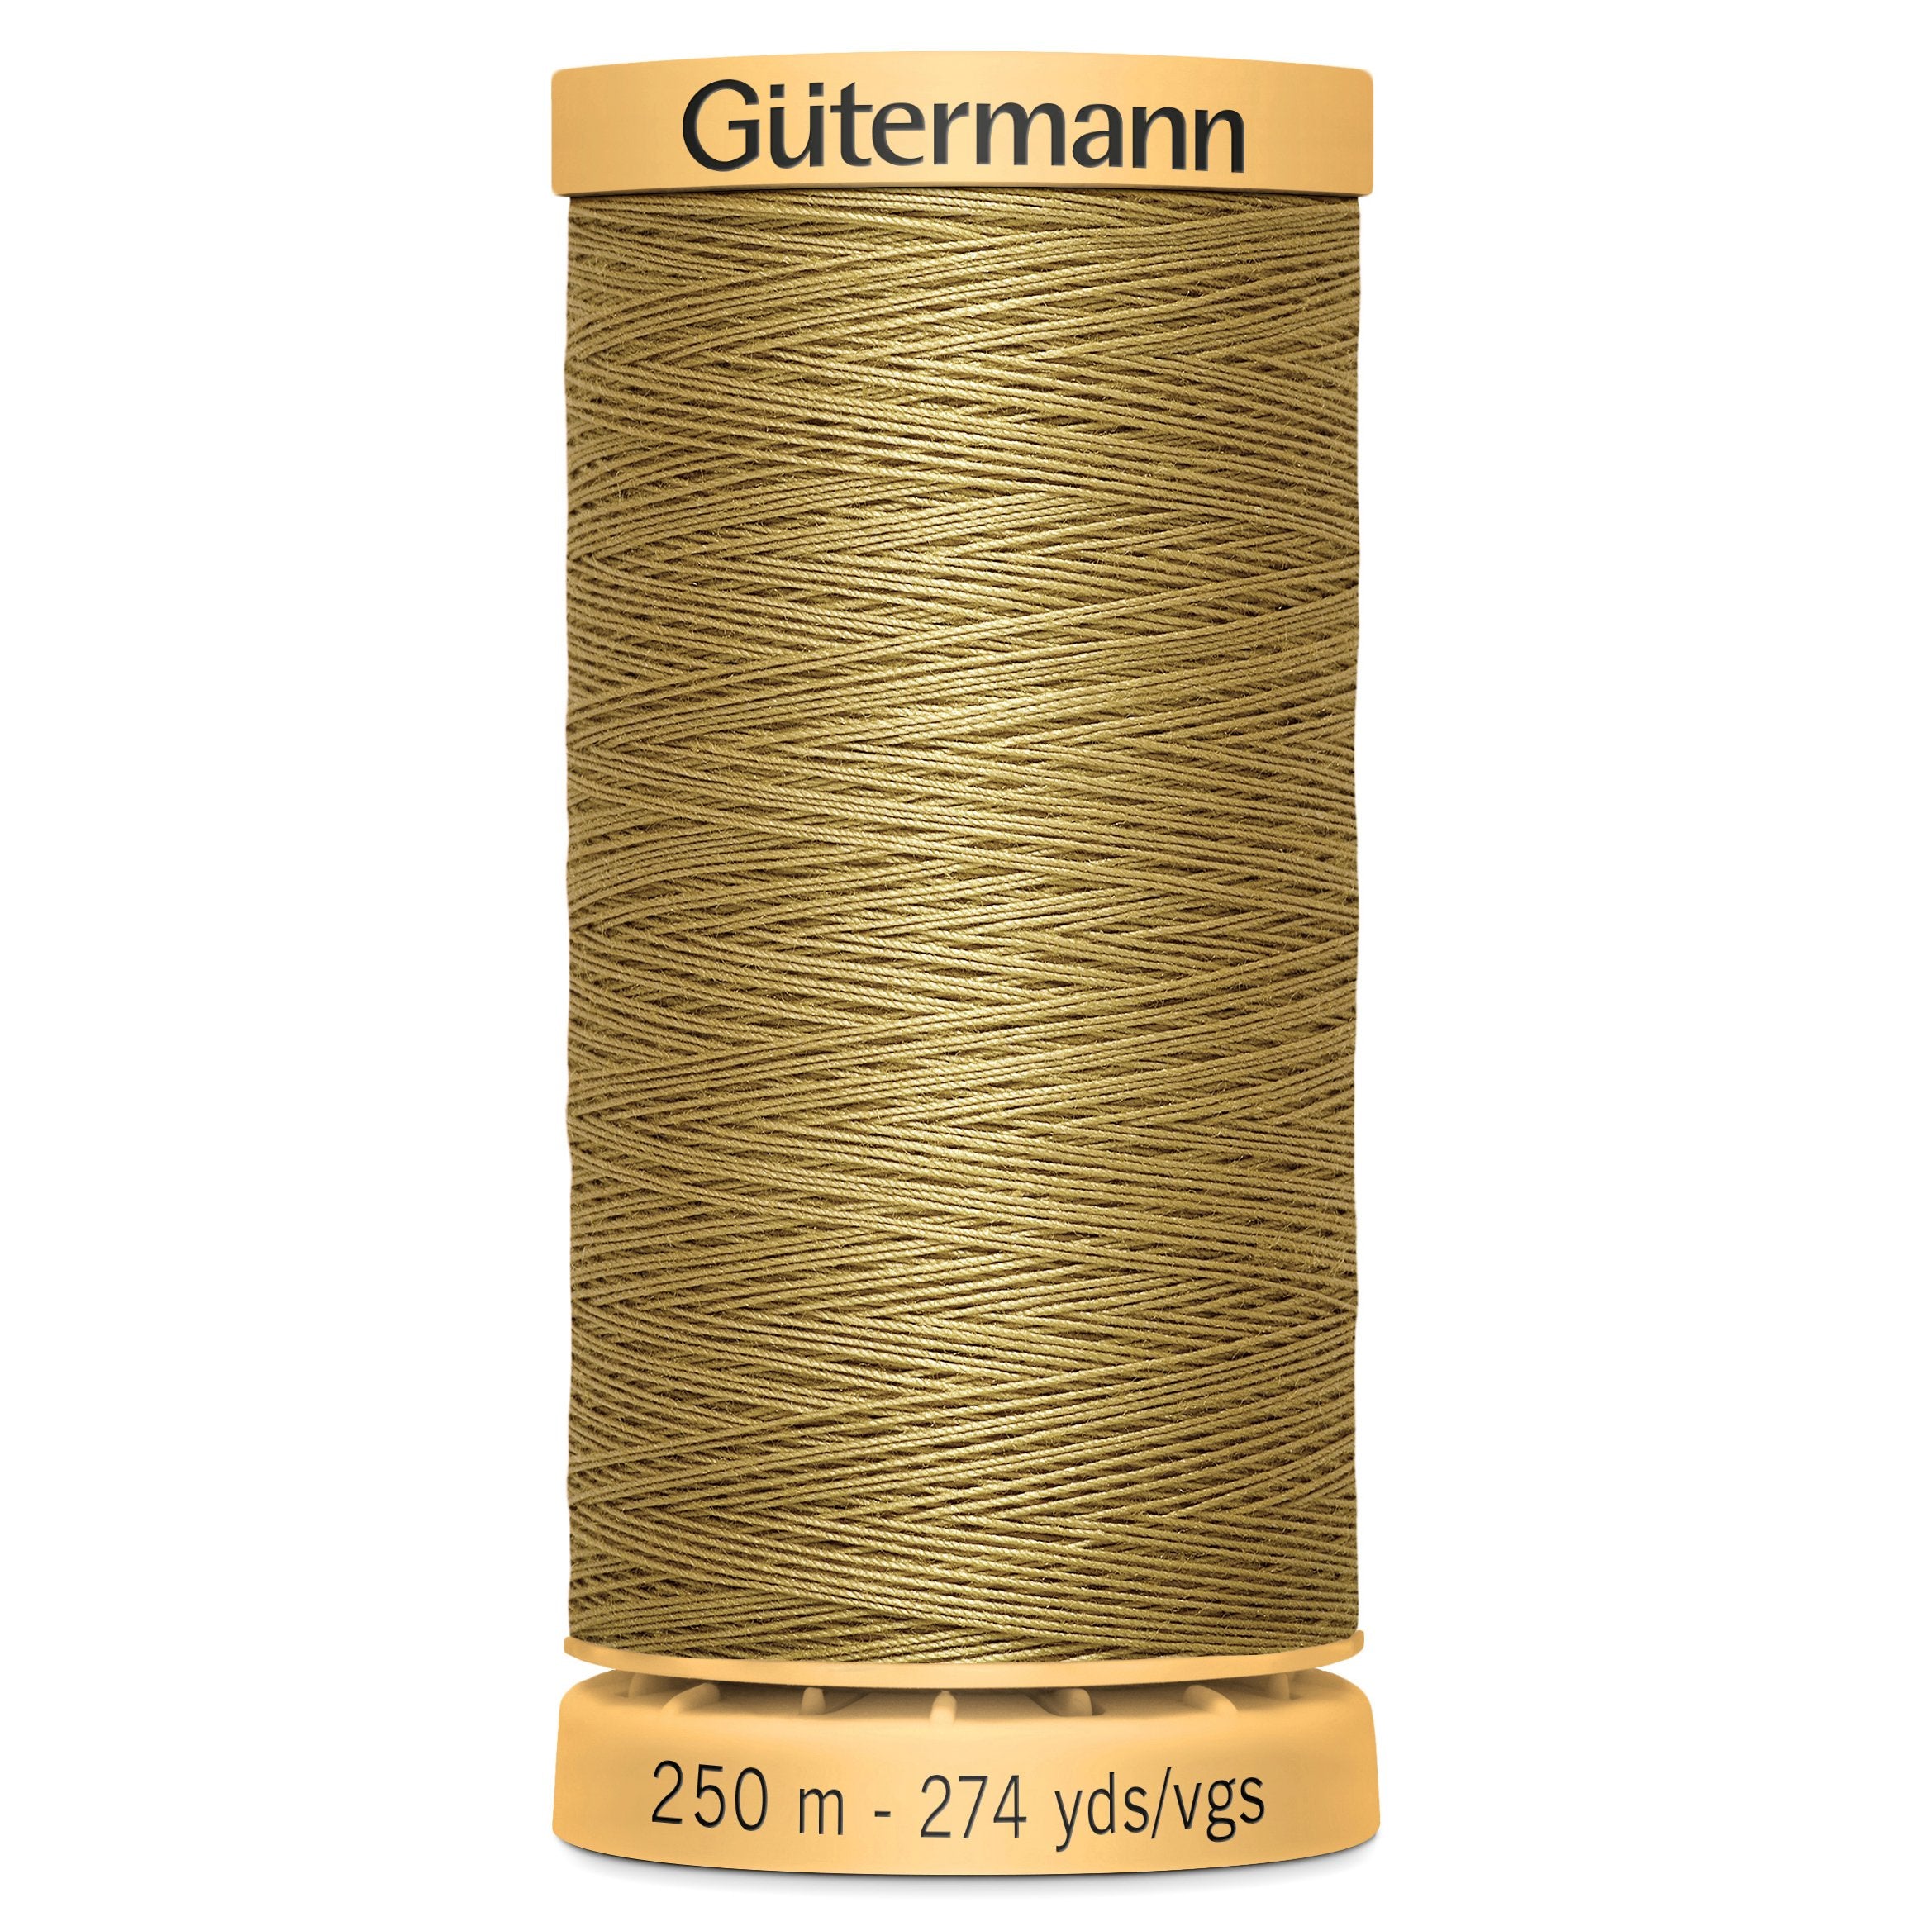 Gutermann Natural Cotton - 1136 from Jaycotts Sewing Supplies